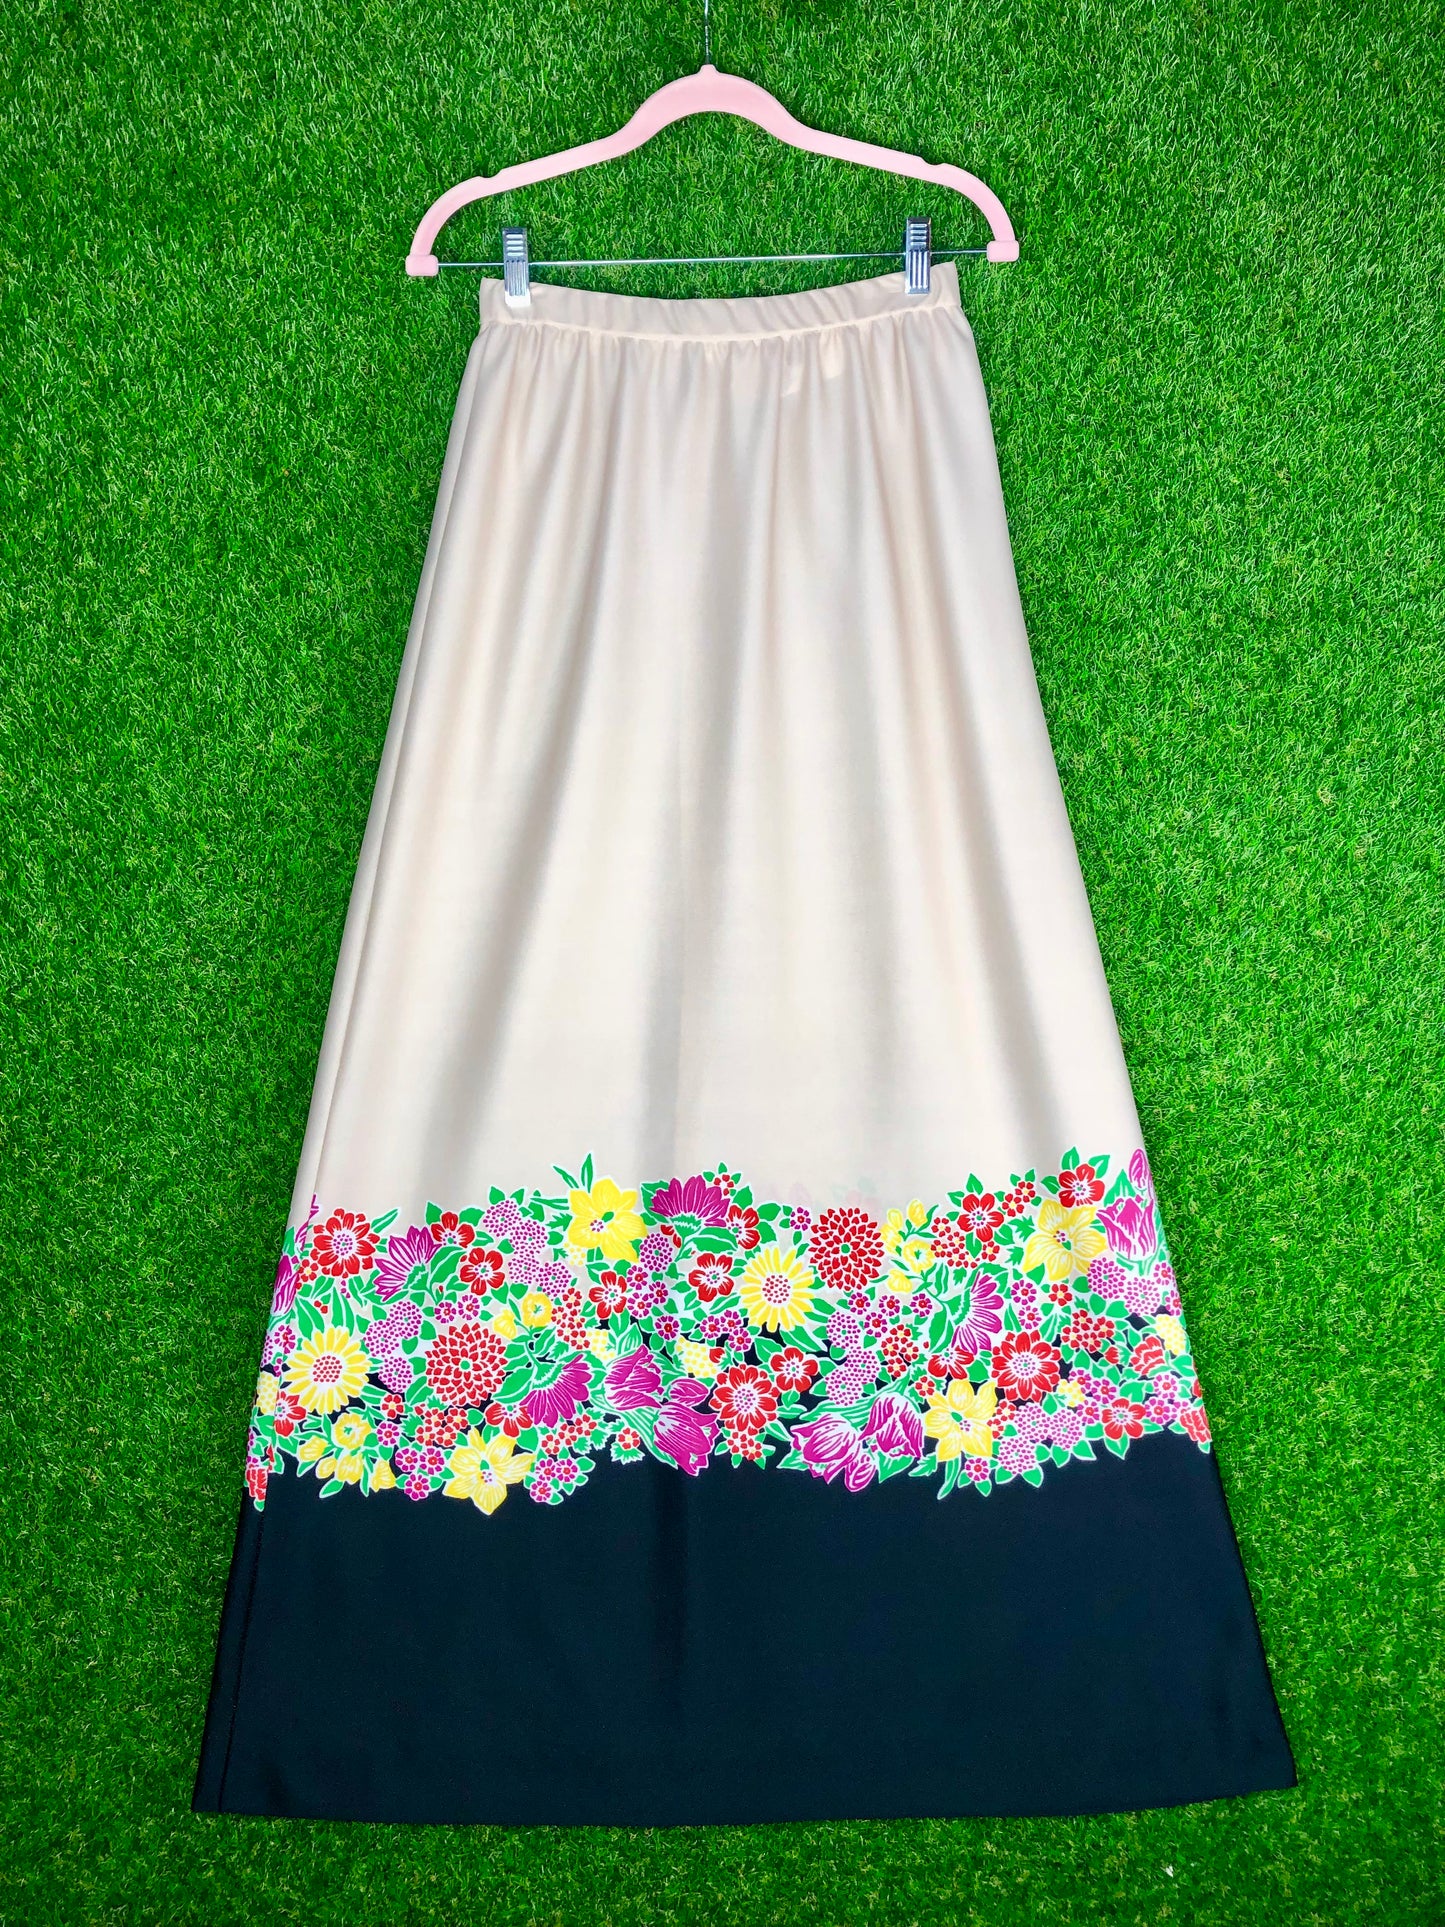 1970's Classic Cream and Black Maxi Skirt With Floral Accents